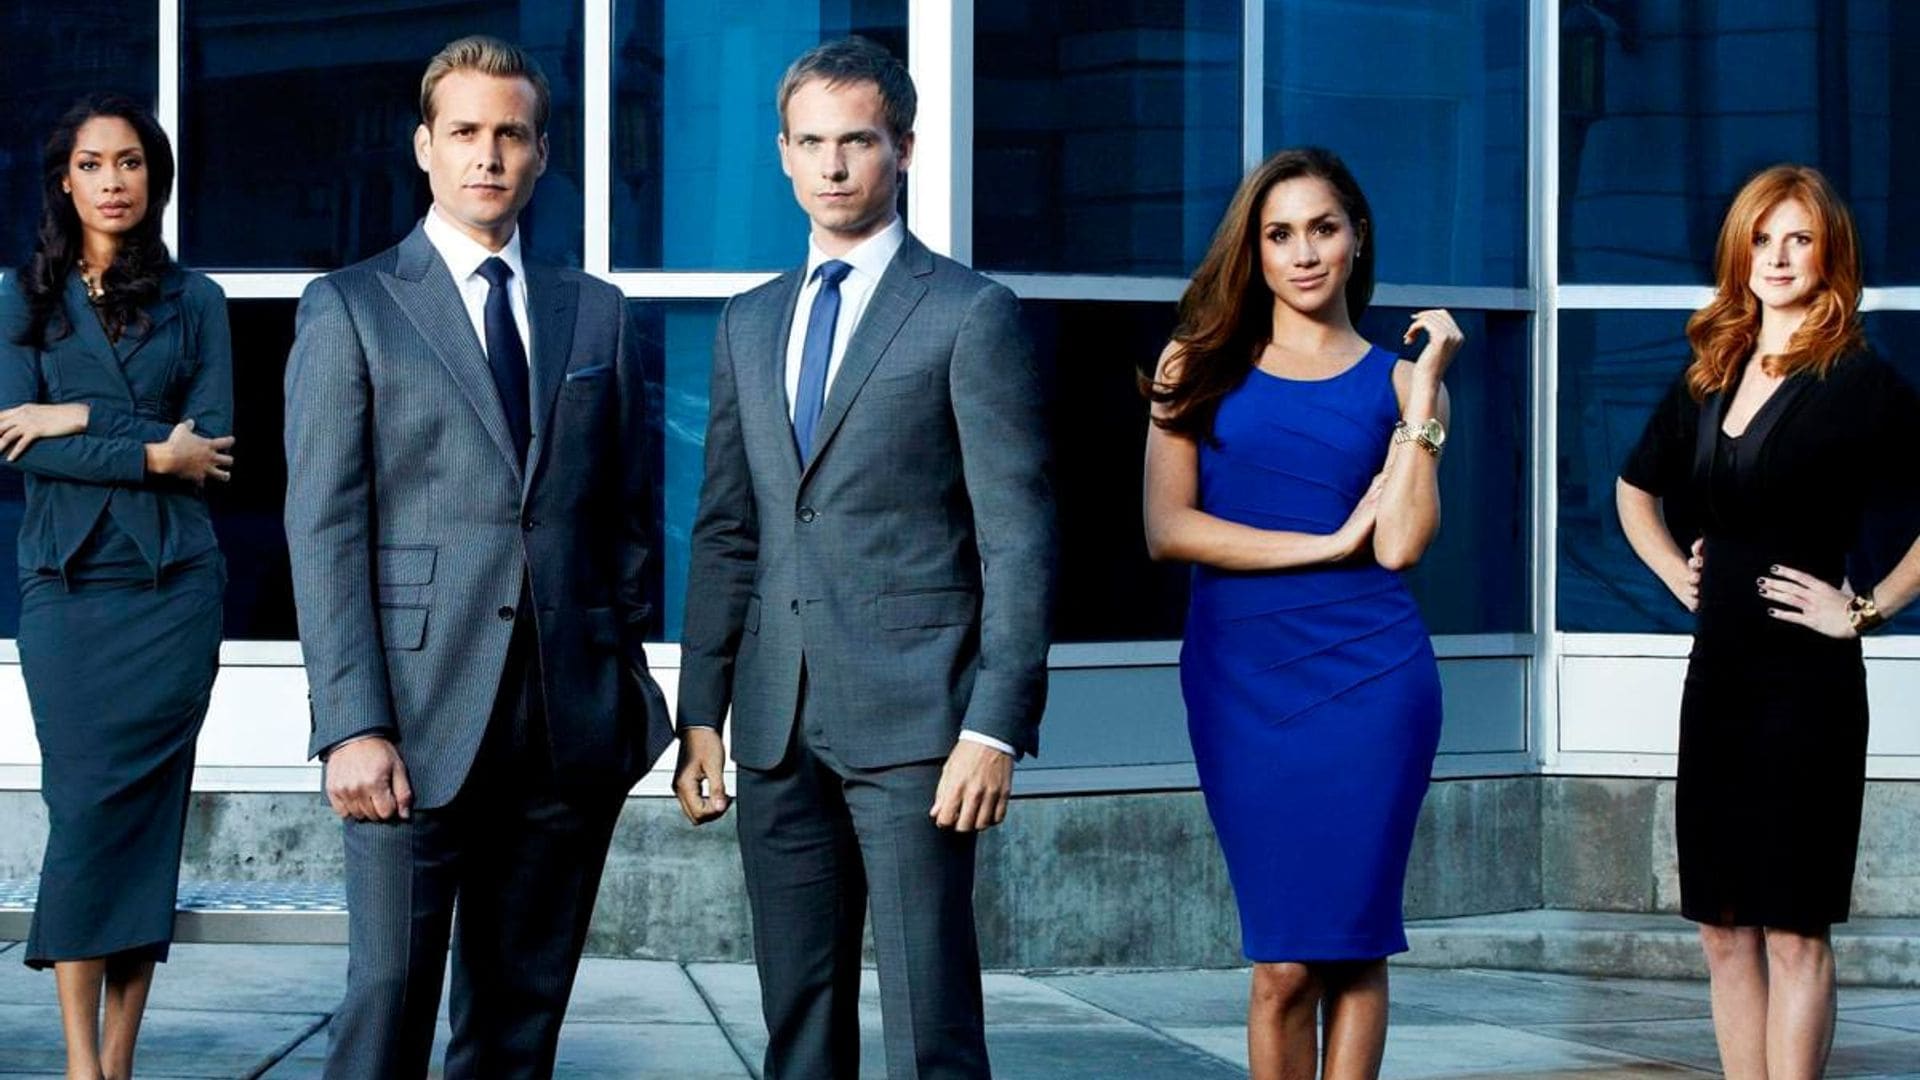 Is Meghan Markle in the ‘Suits’ cast’s group chat?